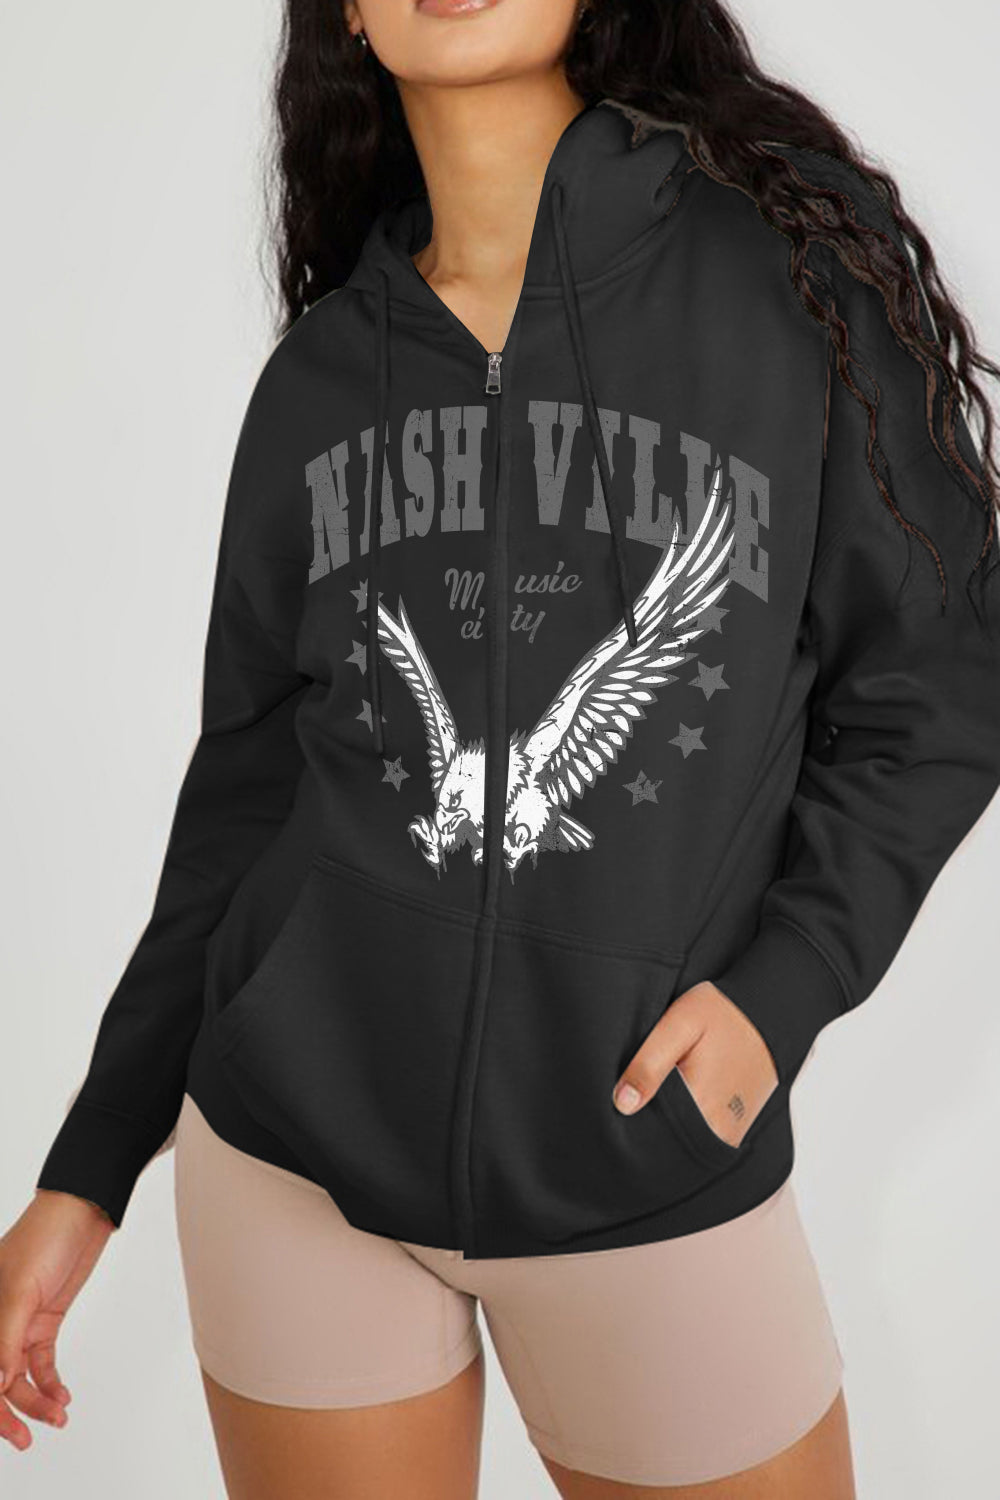 Simply Love Simply Love Full Size NASHVILLE MUSIC CITY Graphic Hoodie